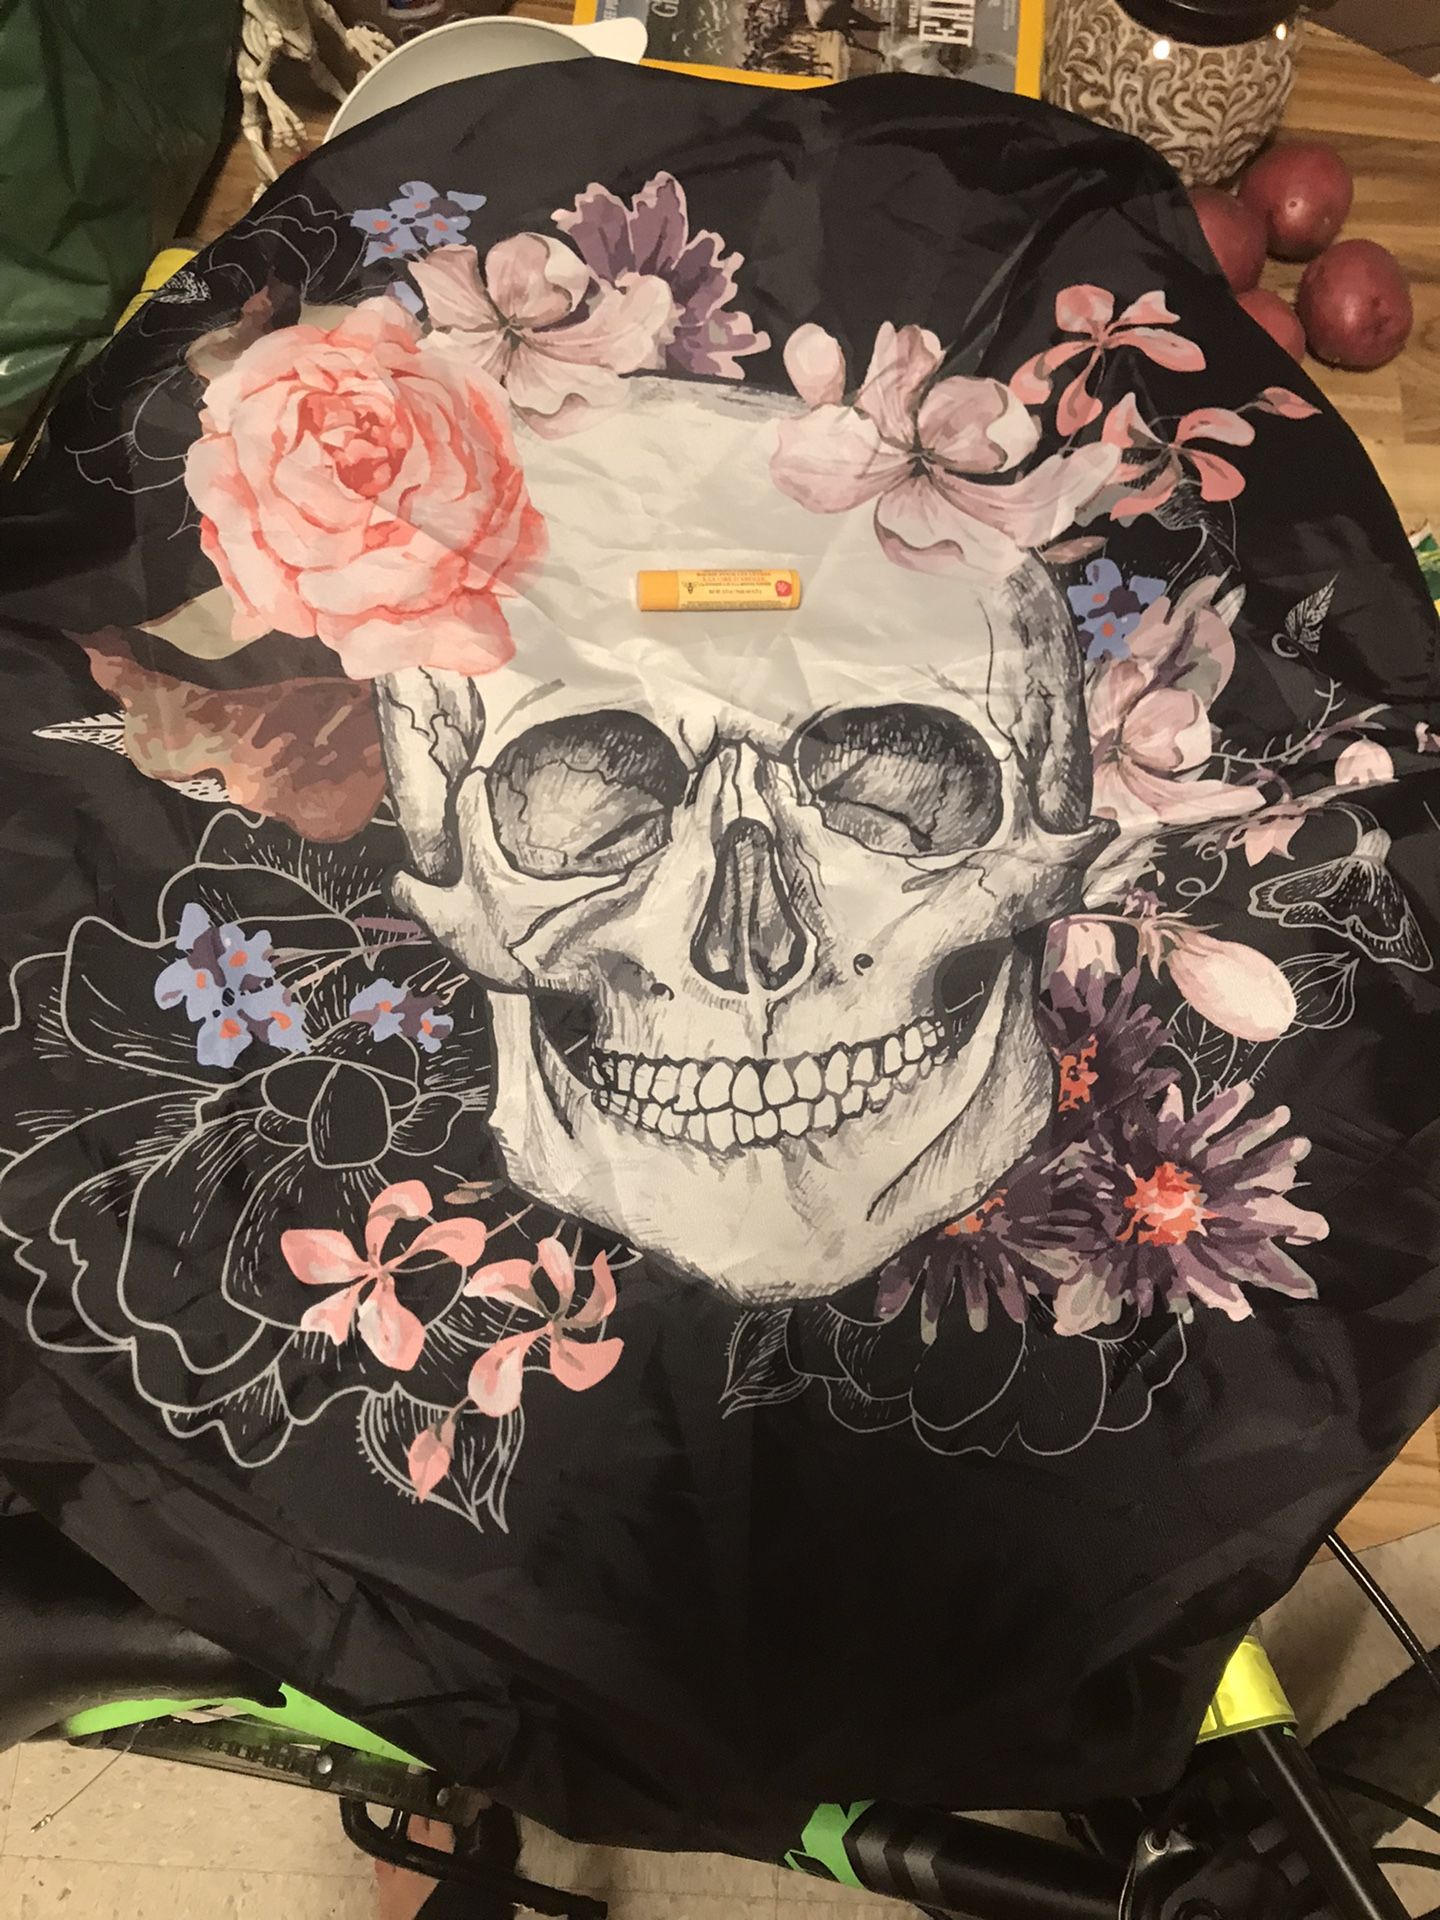 Brand New Tire Cover With Skulls And Flowers 